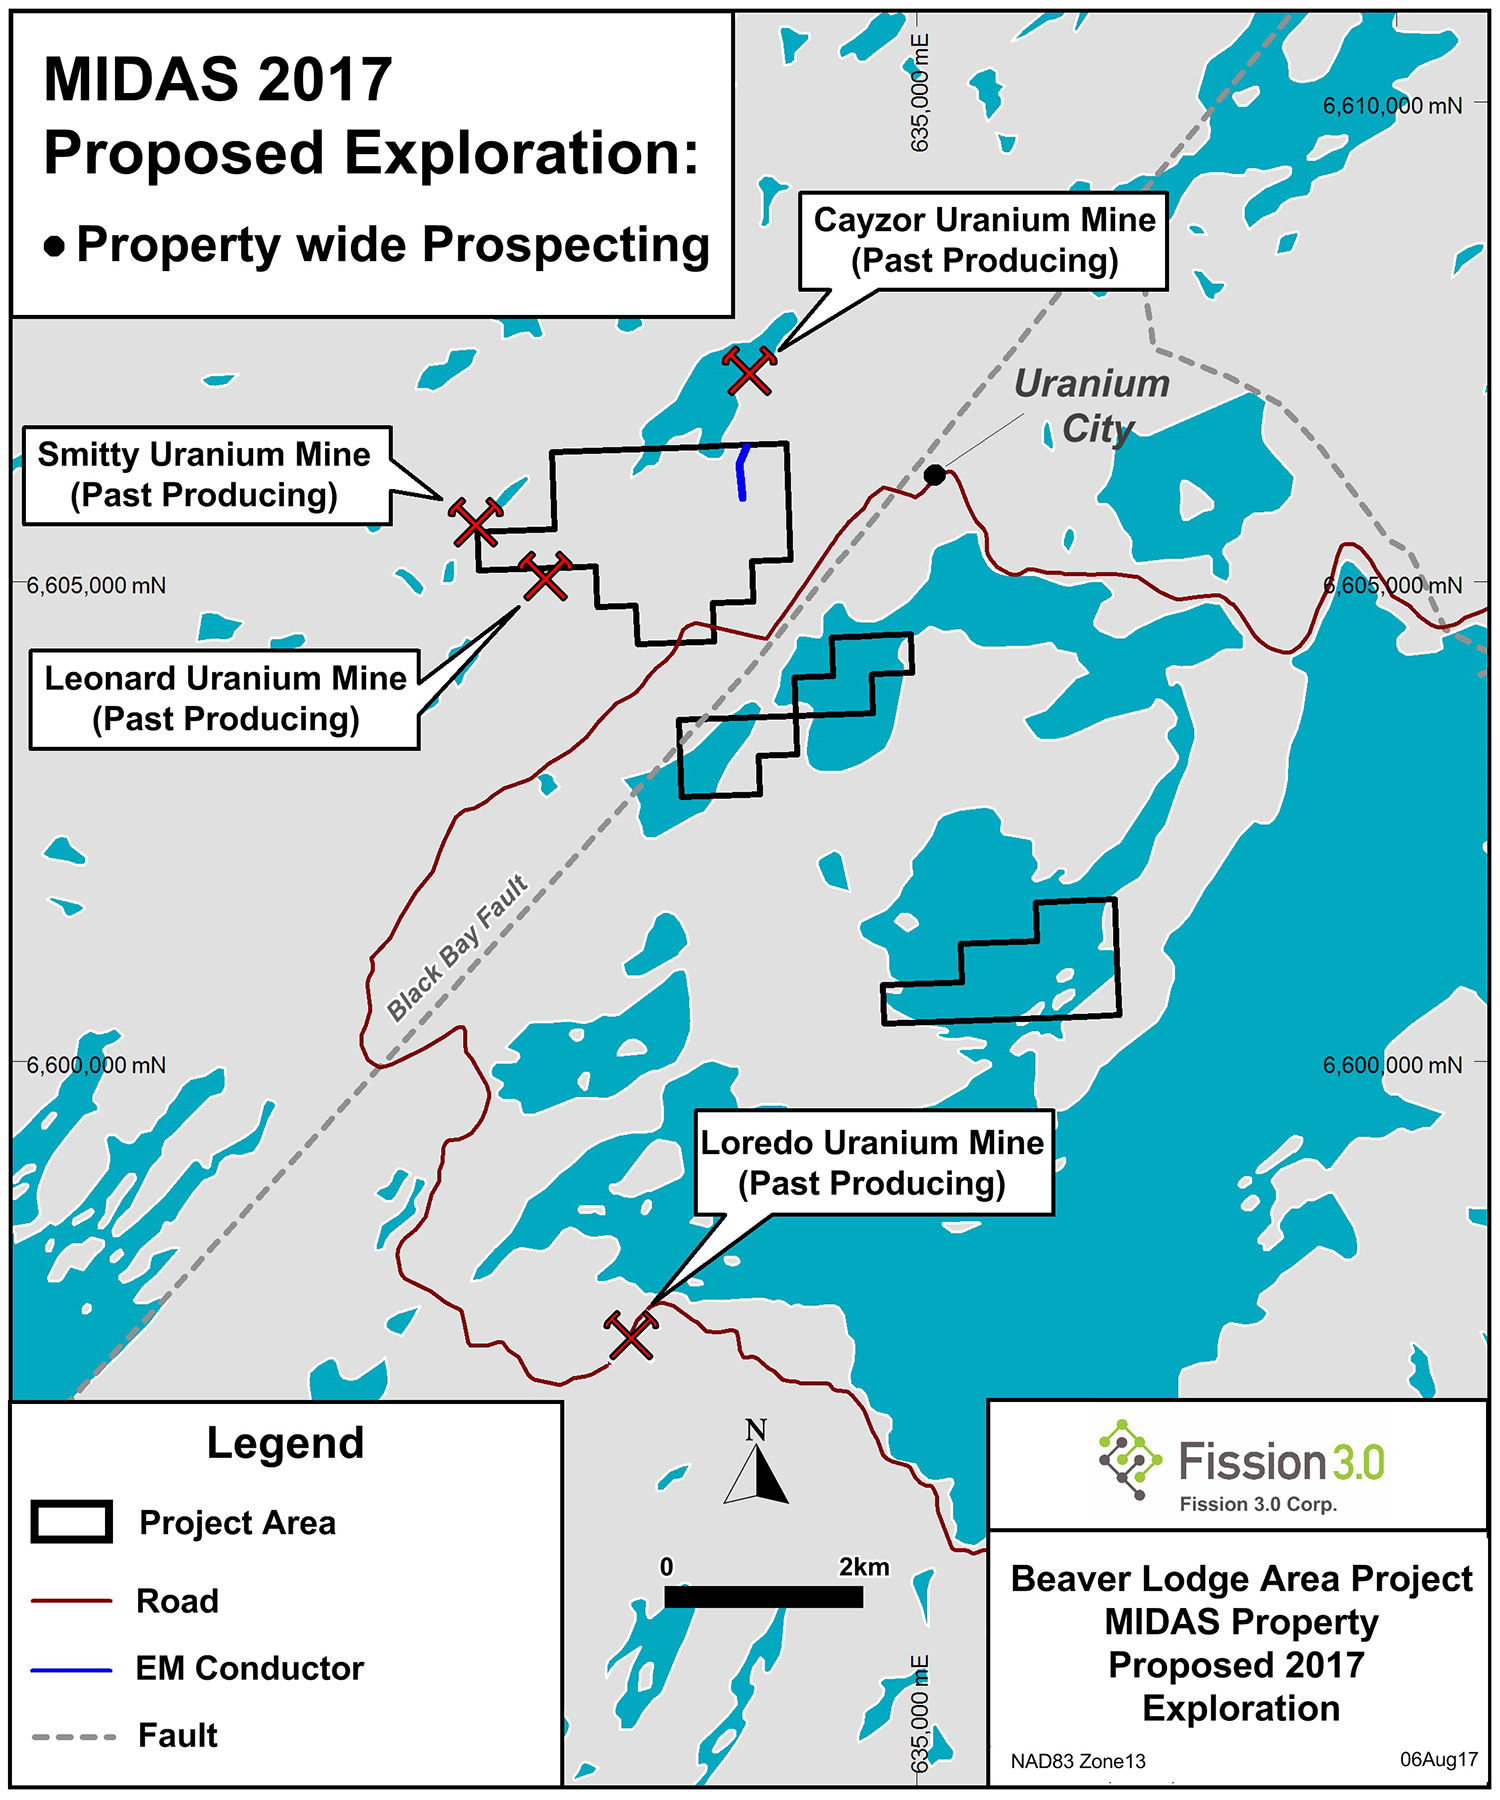 Beaver Lodge Area Project MIDAS Property Proposed 2017 Exploration